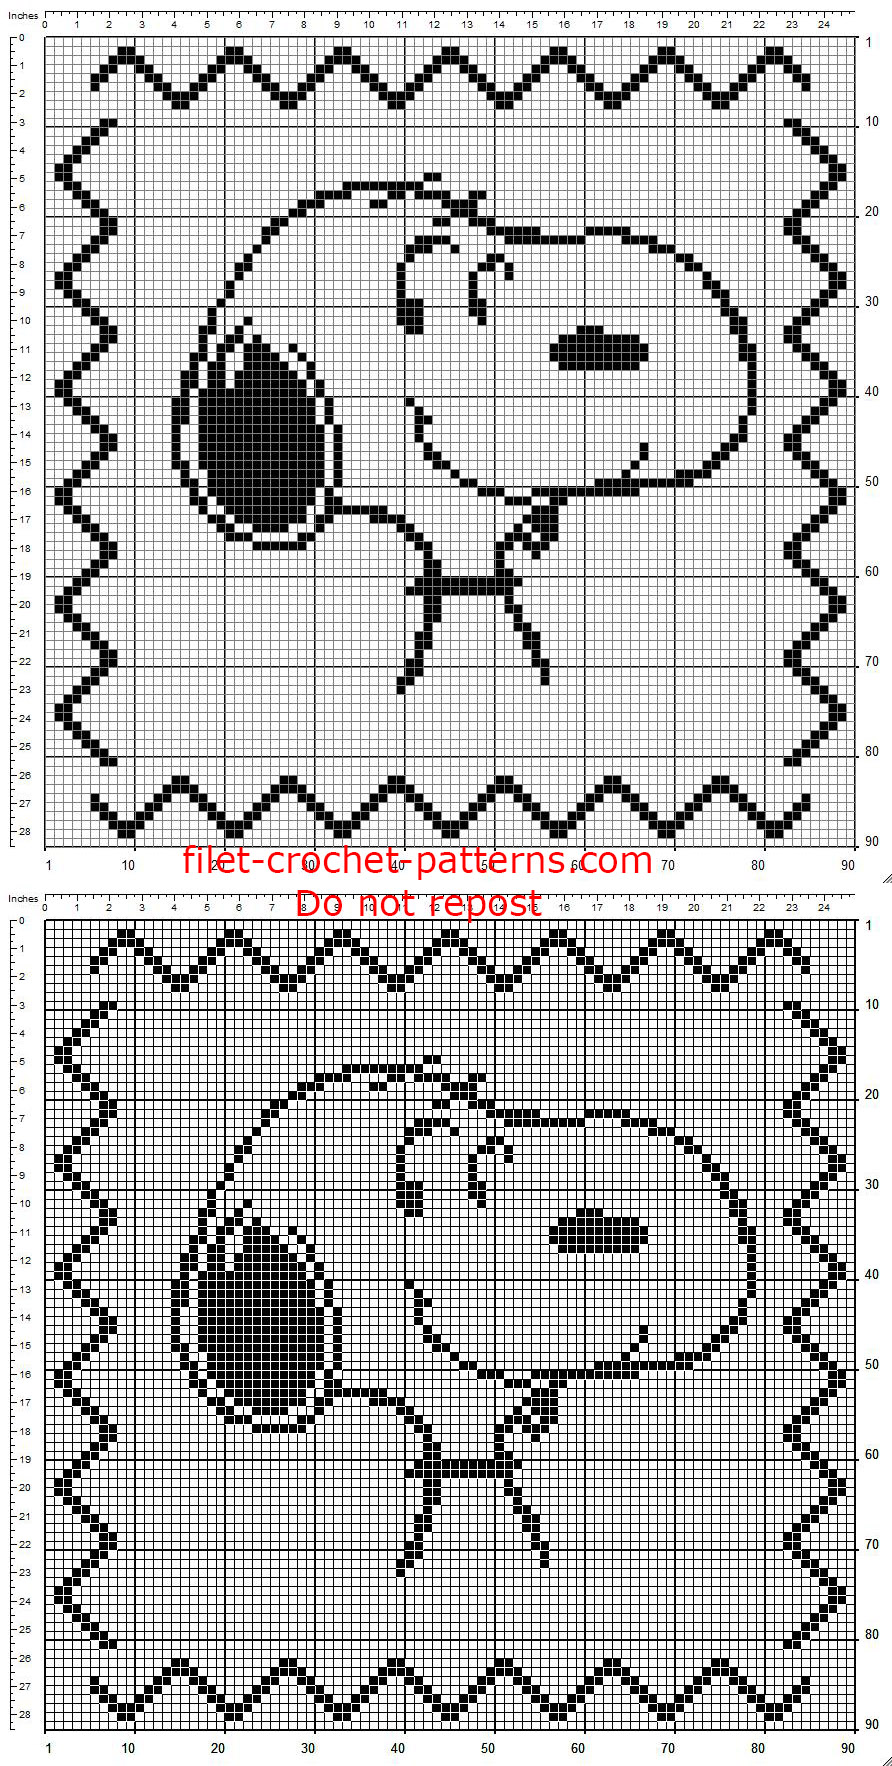 Crochet filet children pillow with Peanuts Snoopy pattern size 90 x 90 squares